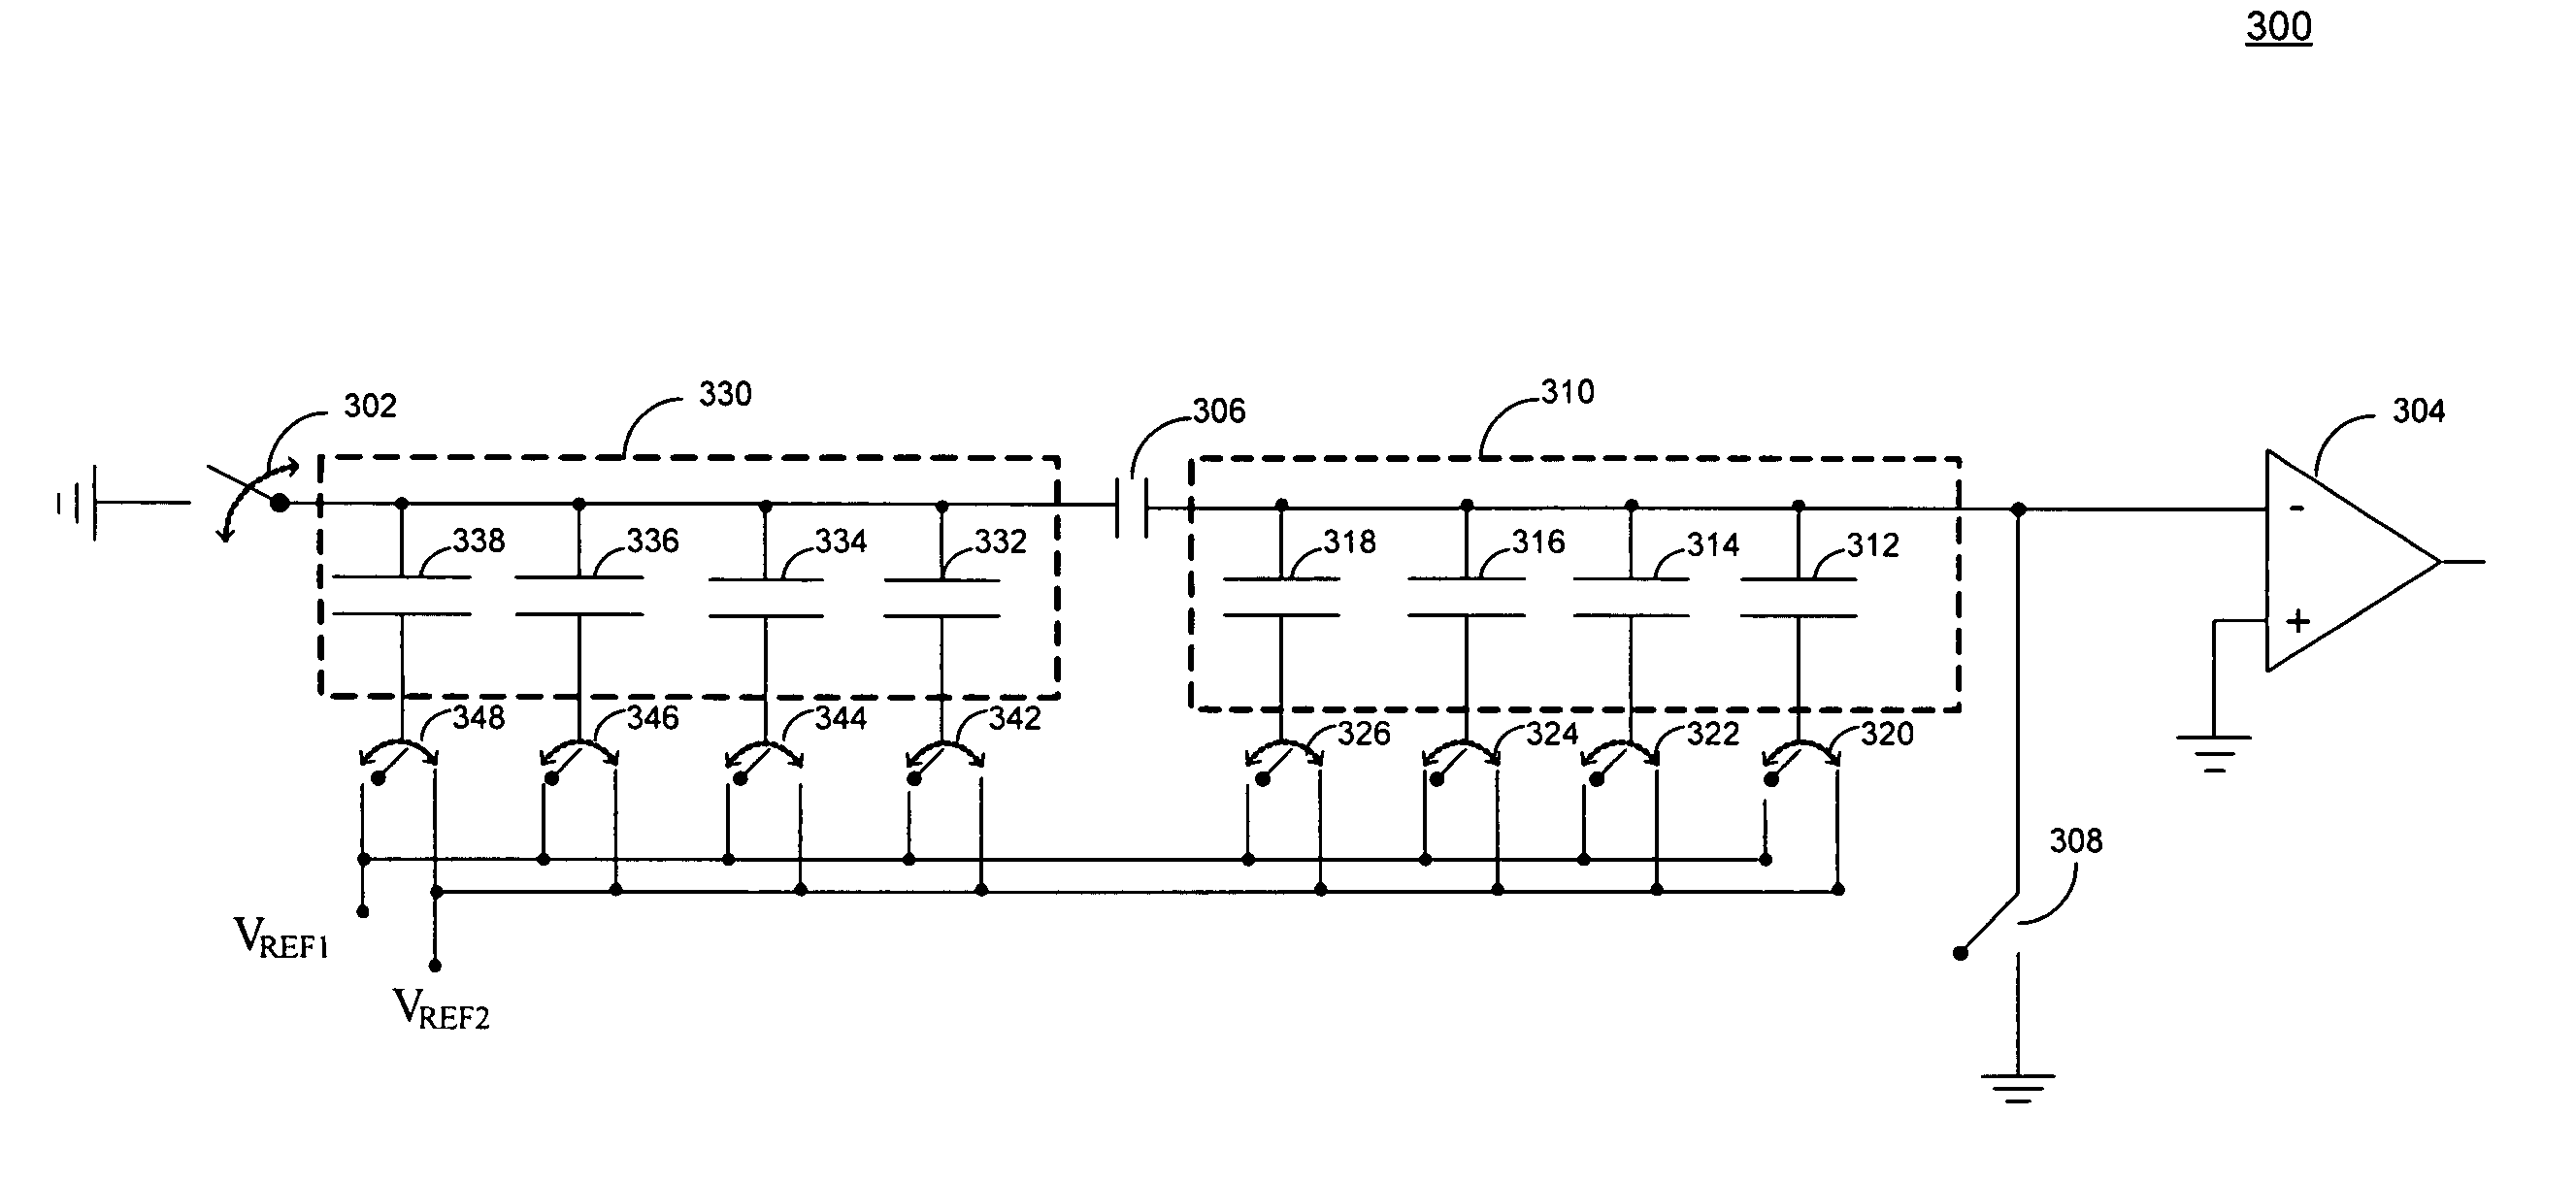 Systems and methods for characterizing component ratios and generating a digital representation of same